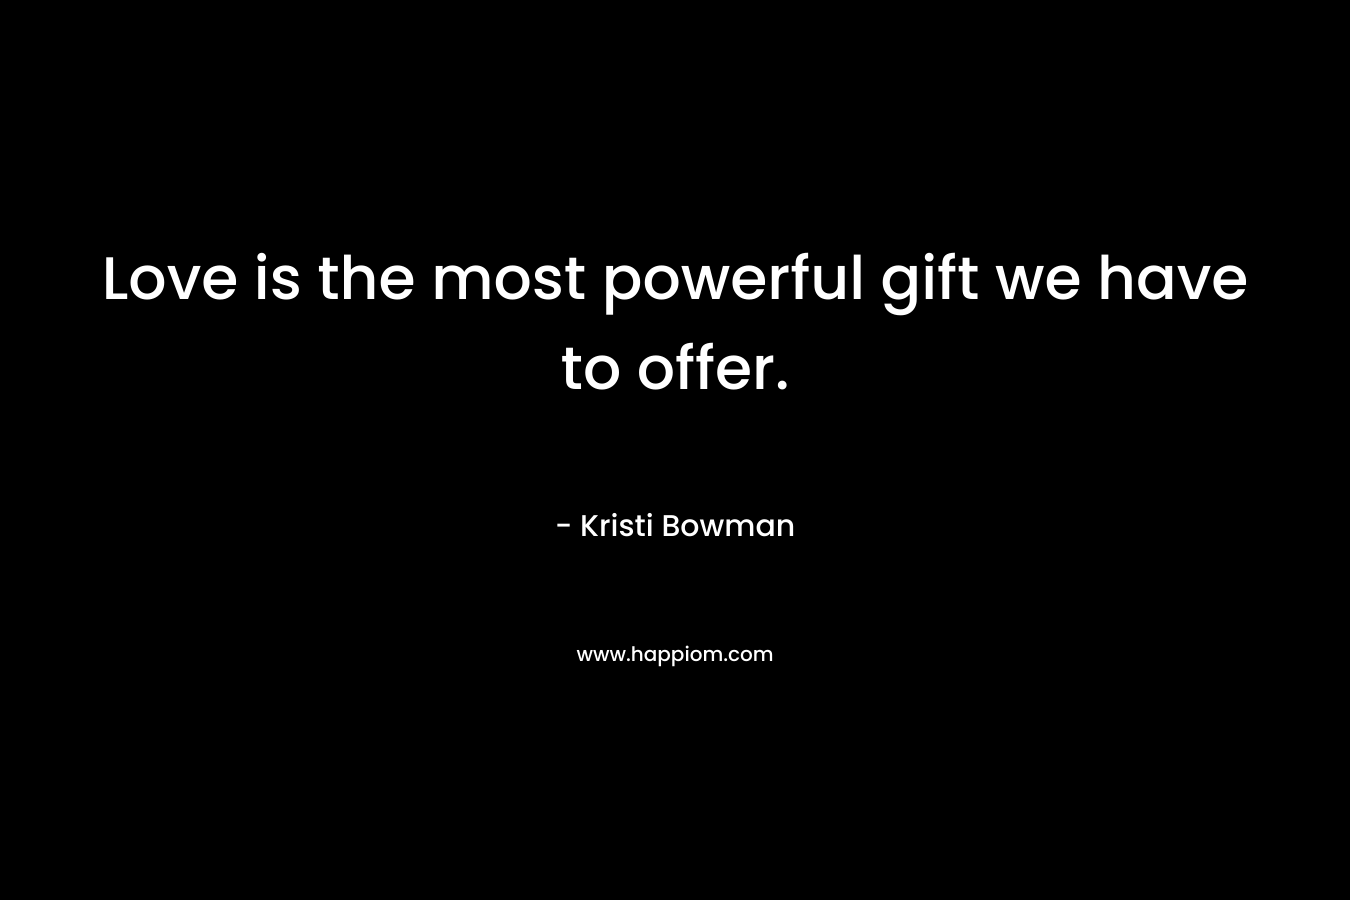 Love is the most powerful gift we have to offer. – Kristi Bowman